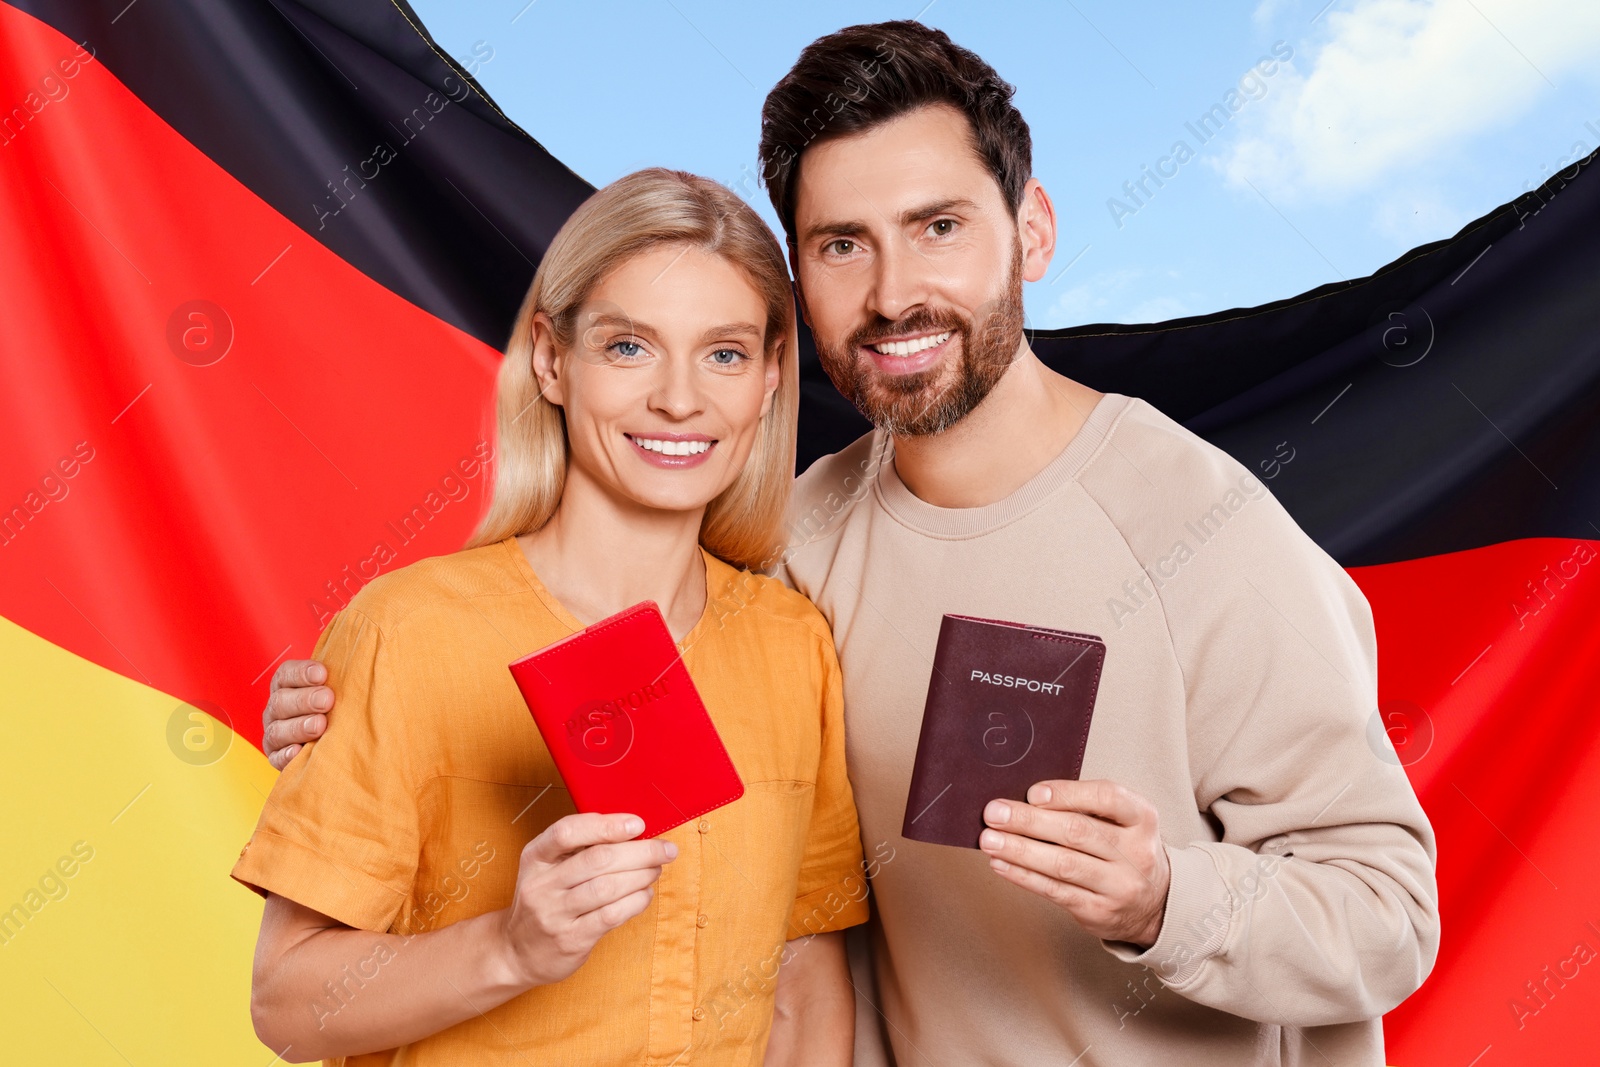 Image of Immigration. Happy couple with passports and national flag of Italy against blue sky